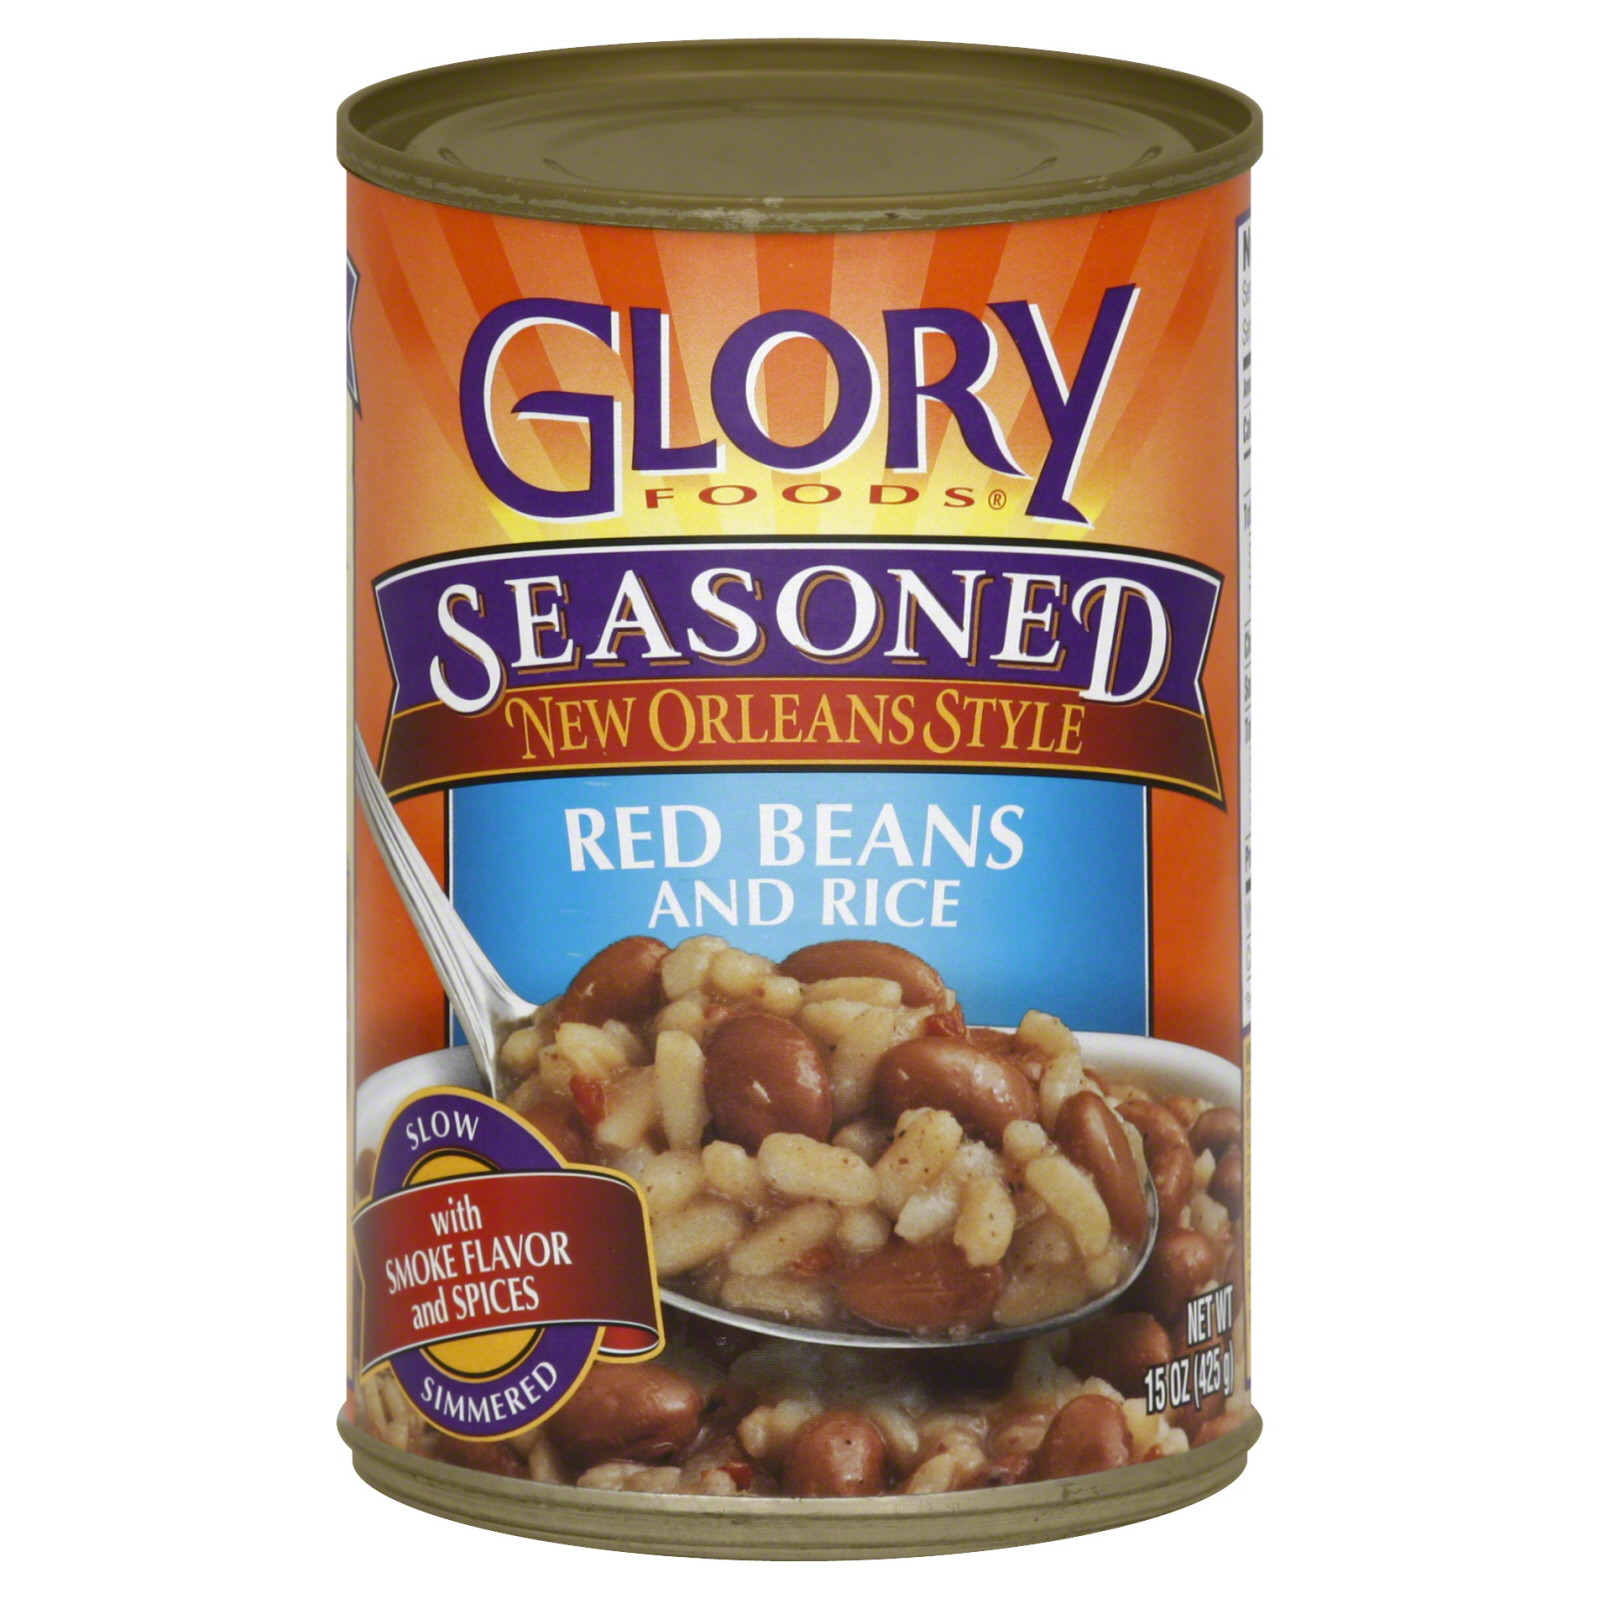 Red Beans And Rice With Canned Beans
 Glory Foods Seasoned Red Beans and Rice New Orleans Style